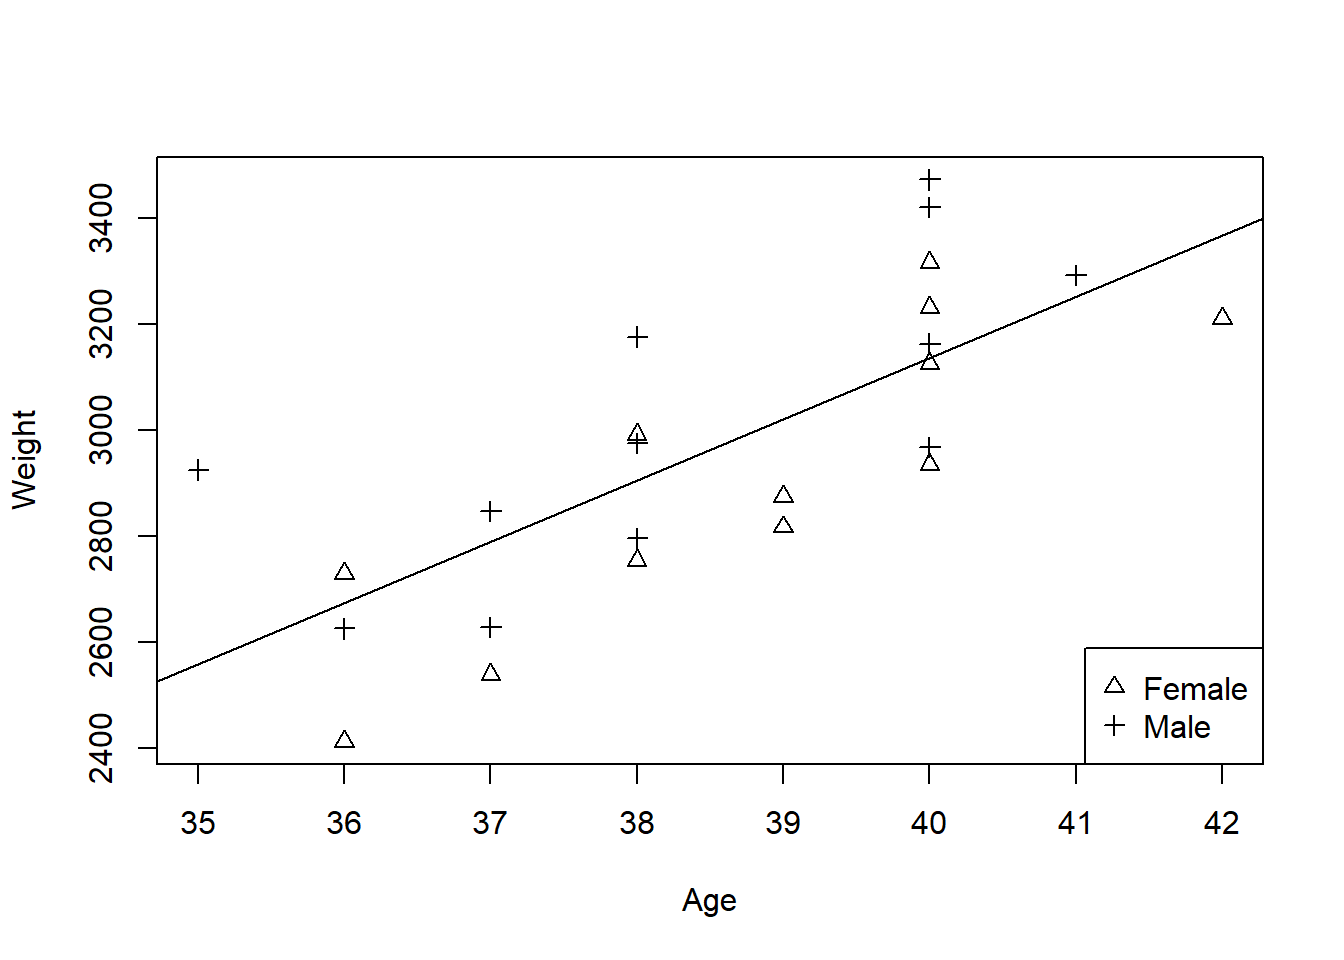 Predicted baby weights using age as a predictor